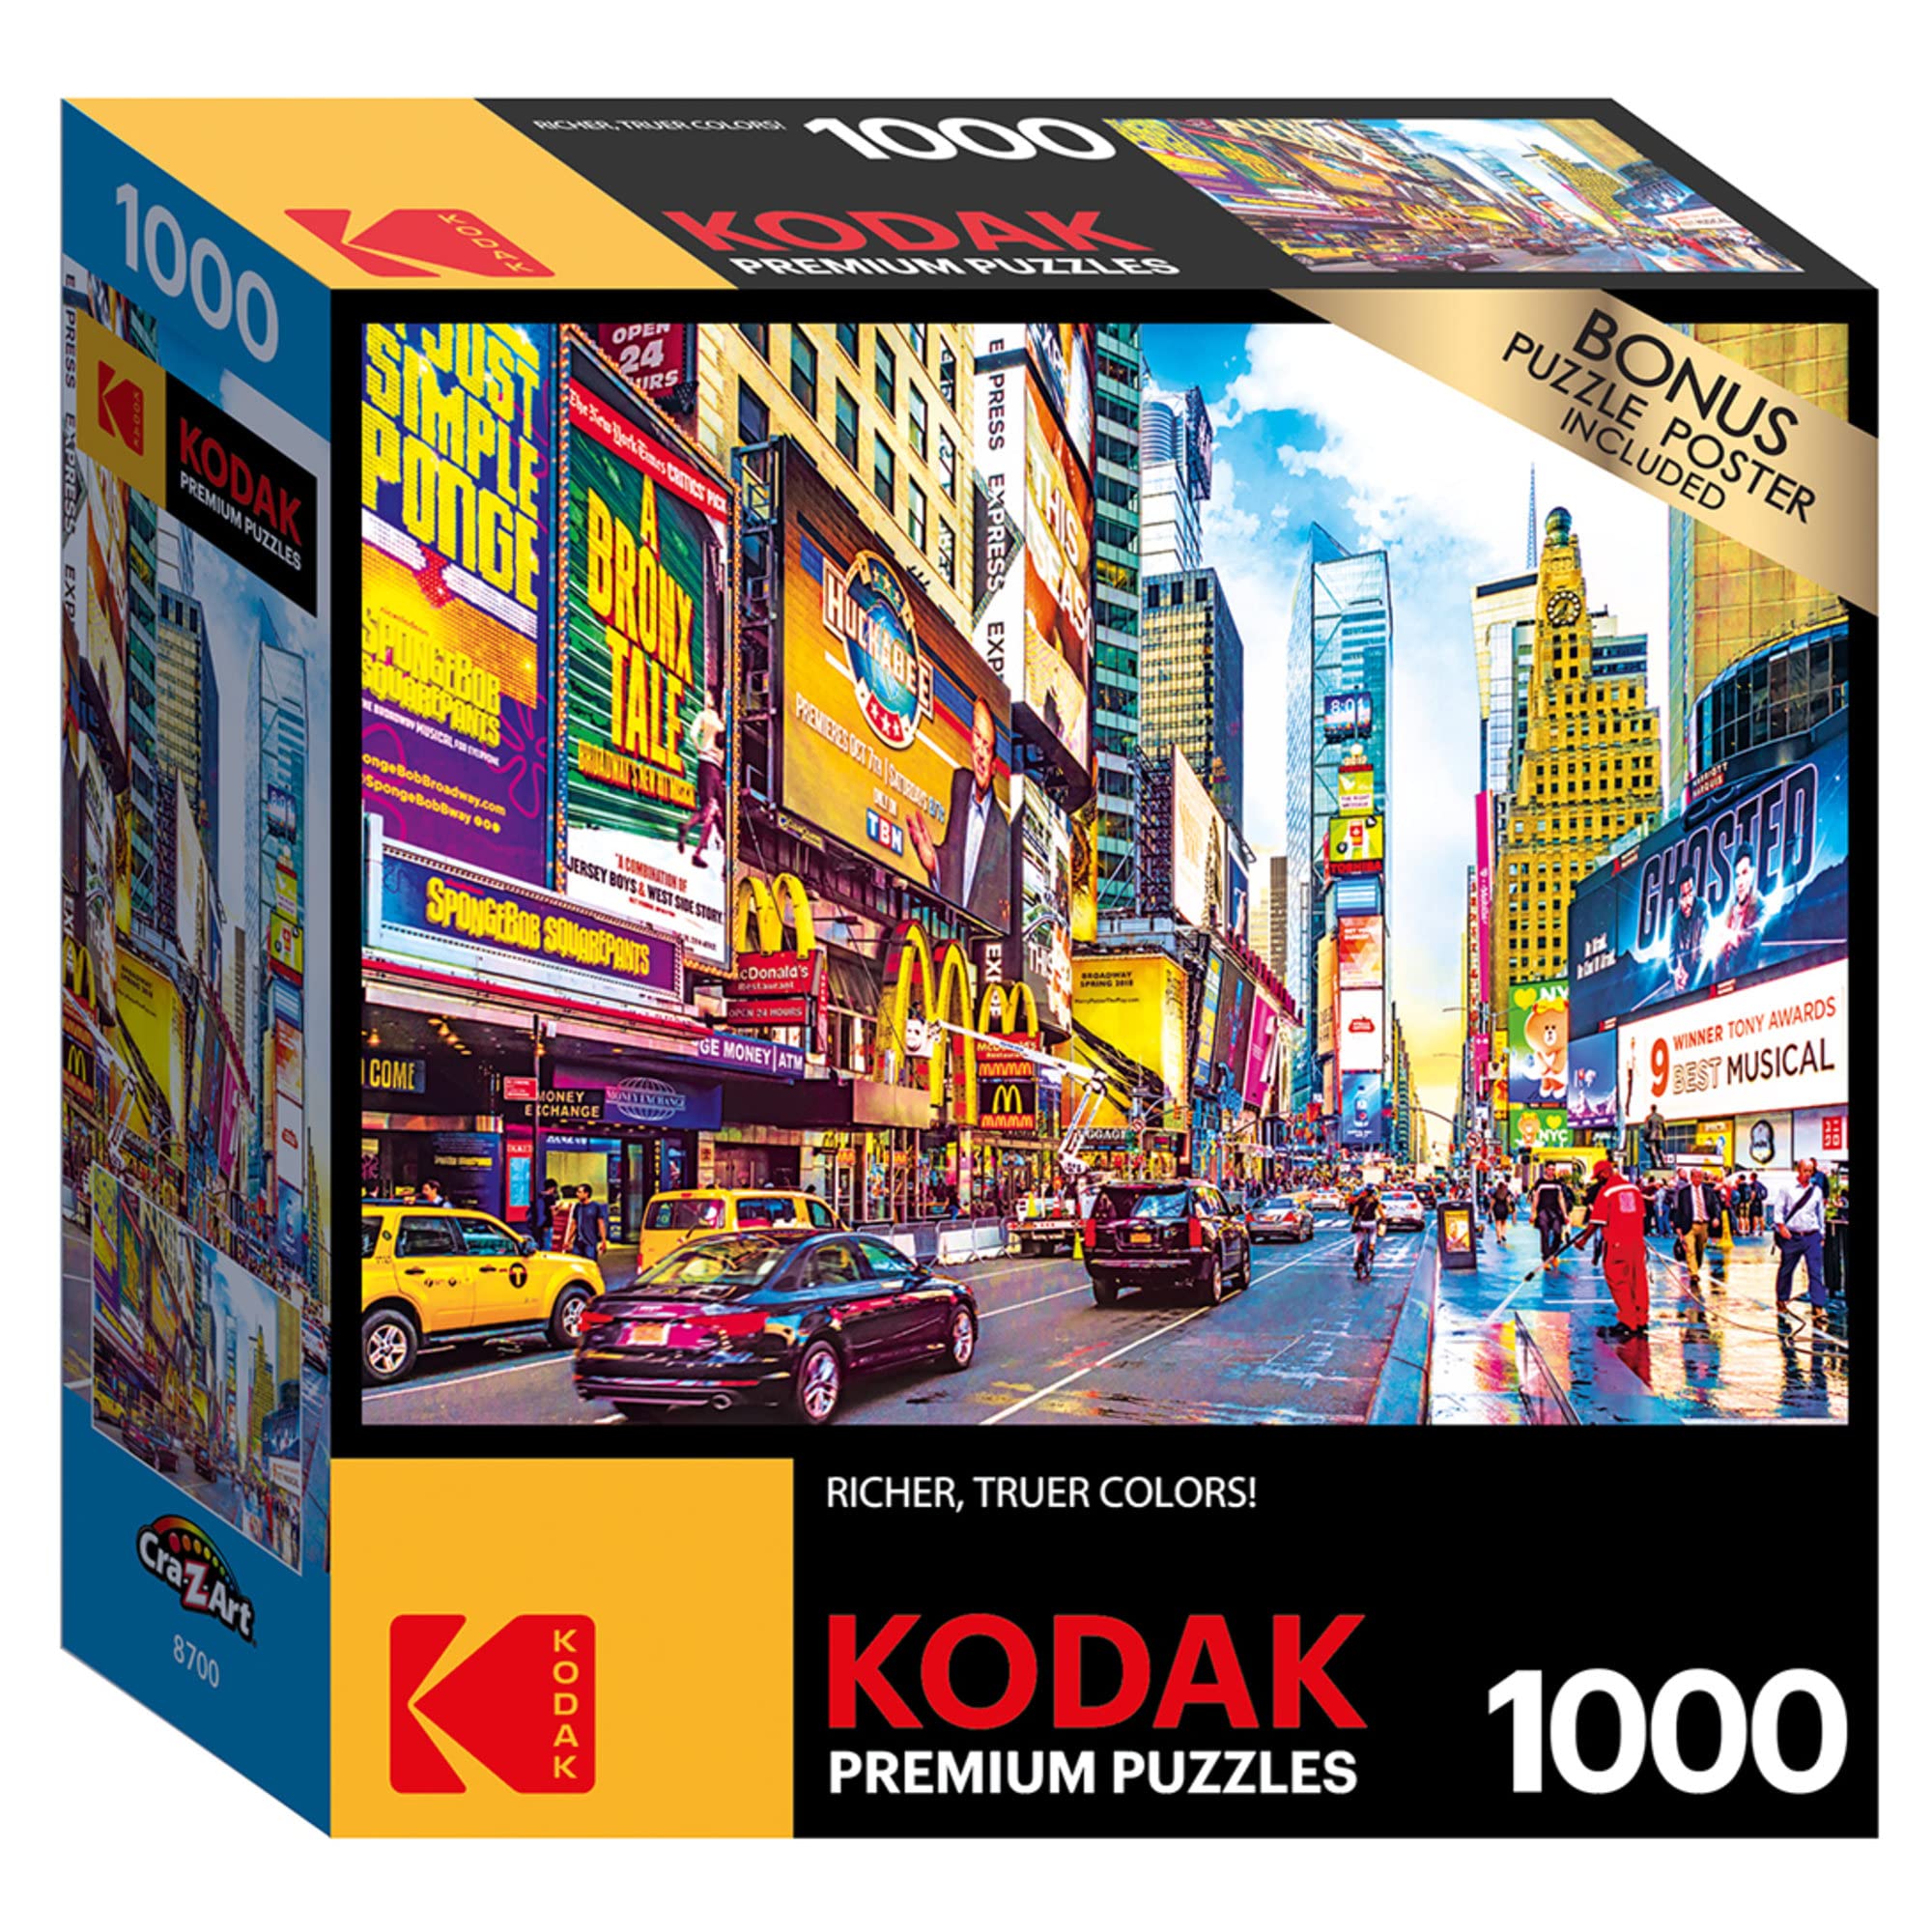 1000-Piece 20” x 27” Cra-Z-Art Kodak Times Square Jigsaw Puzzle $5.92 + Free Shipping w/ Prime or on orders over $35